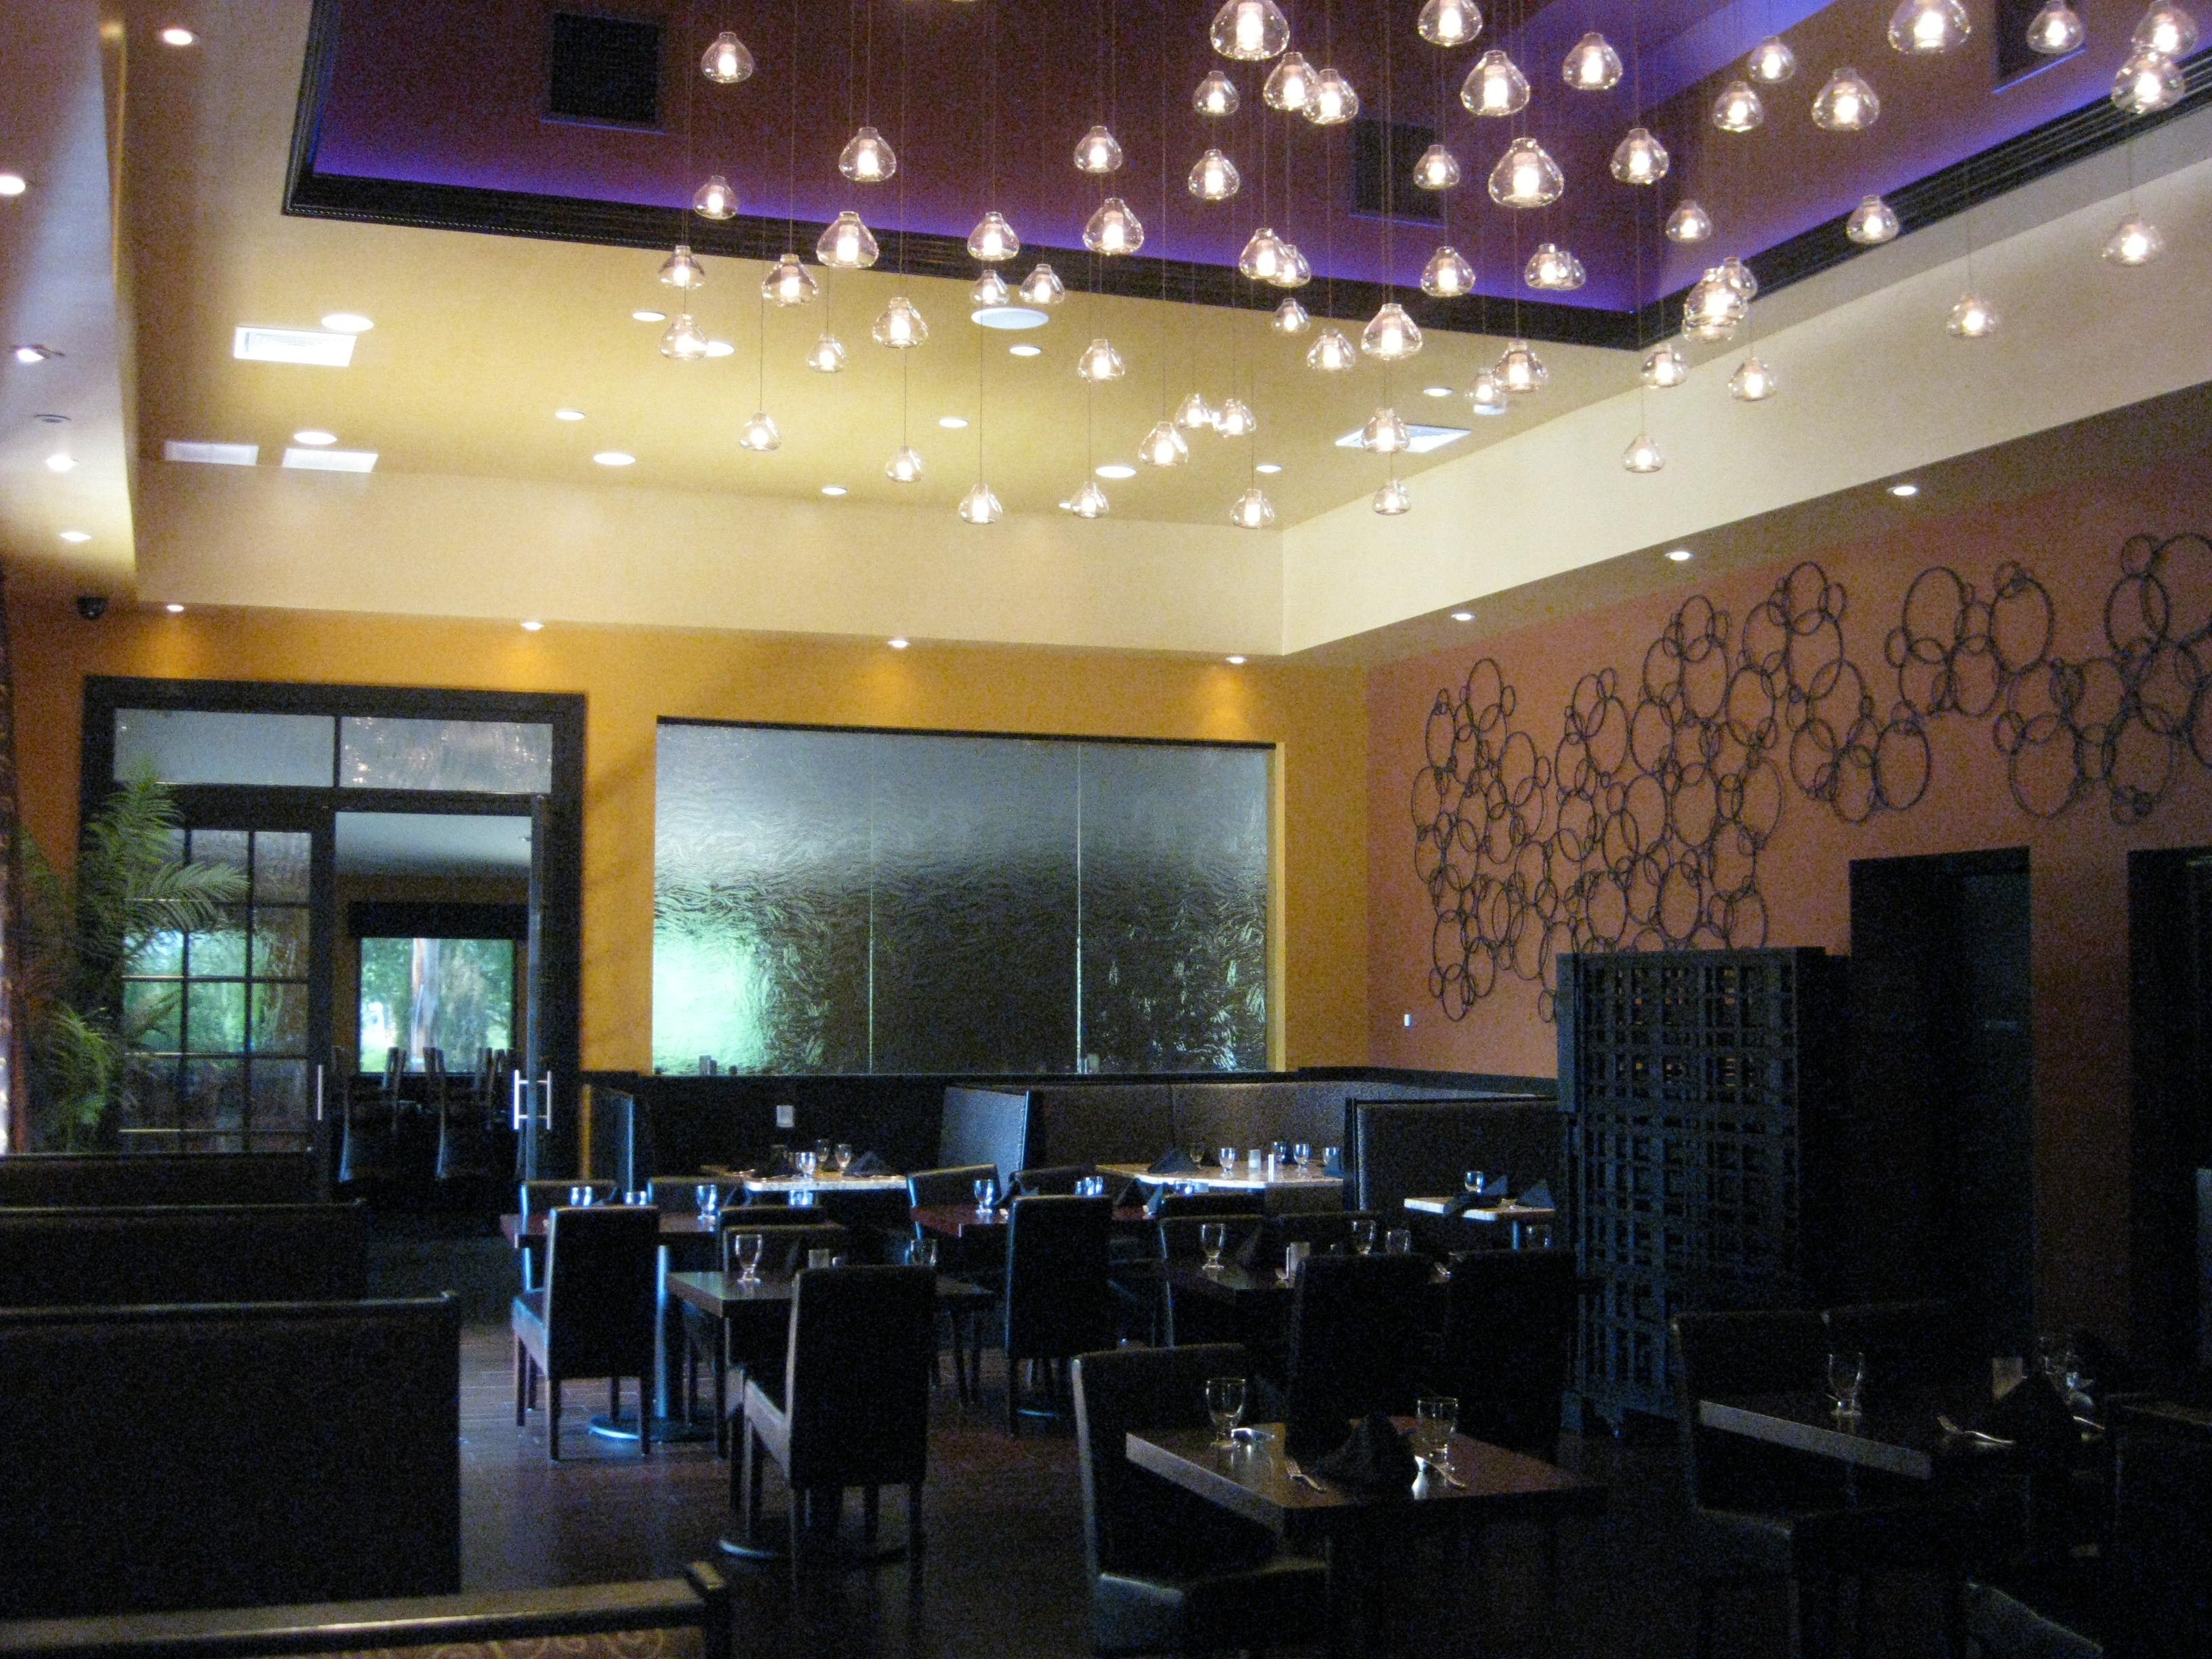 Luchento's Ristrante with RGB LED Lights used in the seating area.